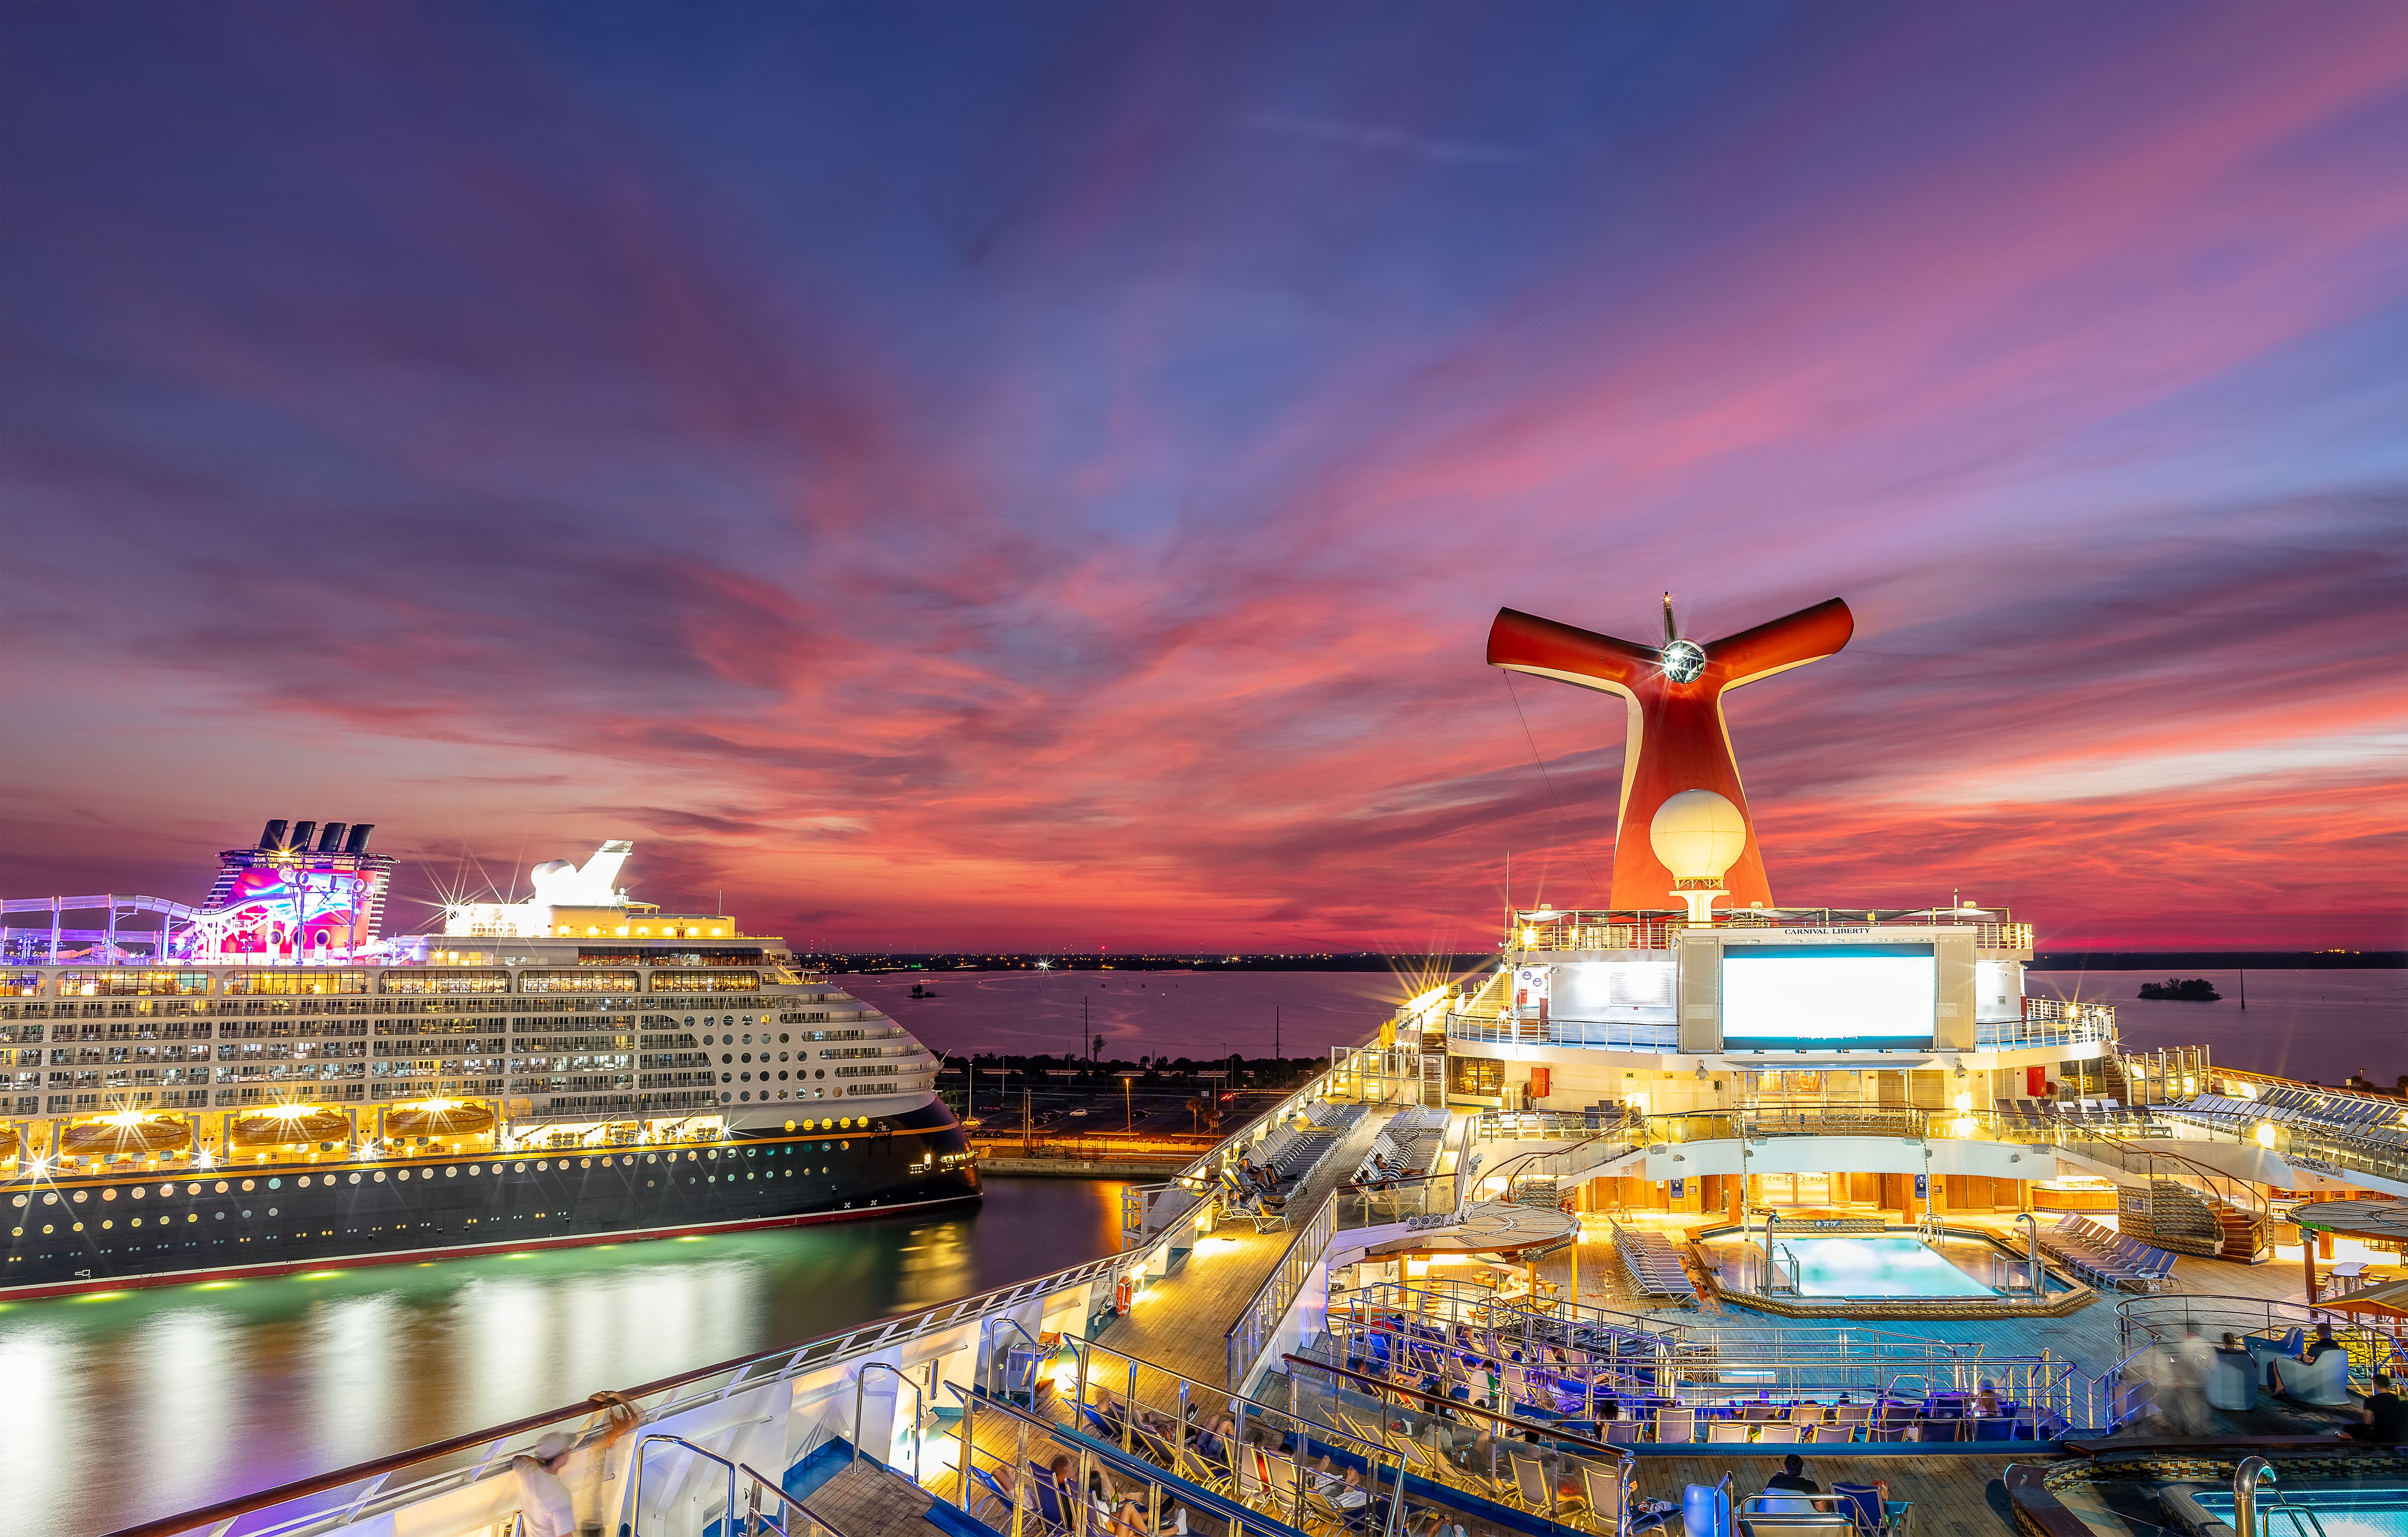 Carnival Cruise Line ship docked at Port Canaveral at sunset, with a vibrant sky and another cruise ship in the distance.